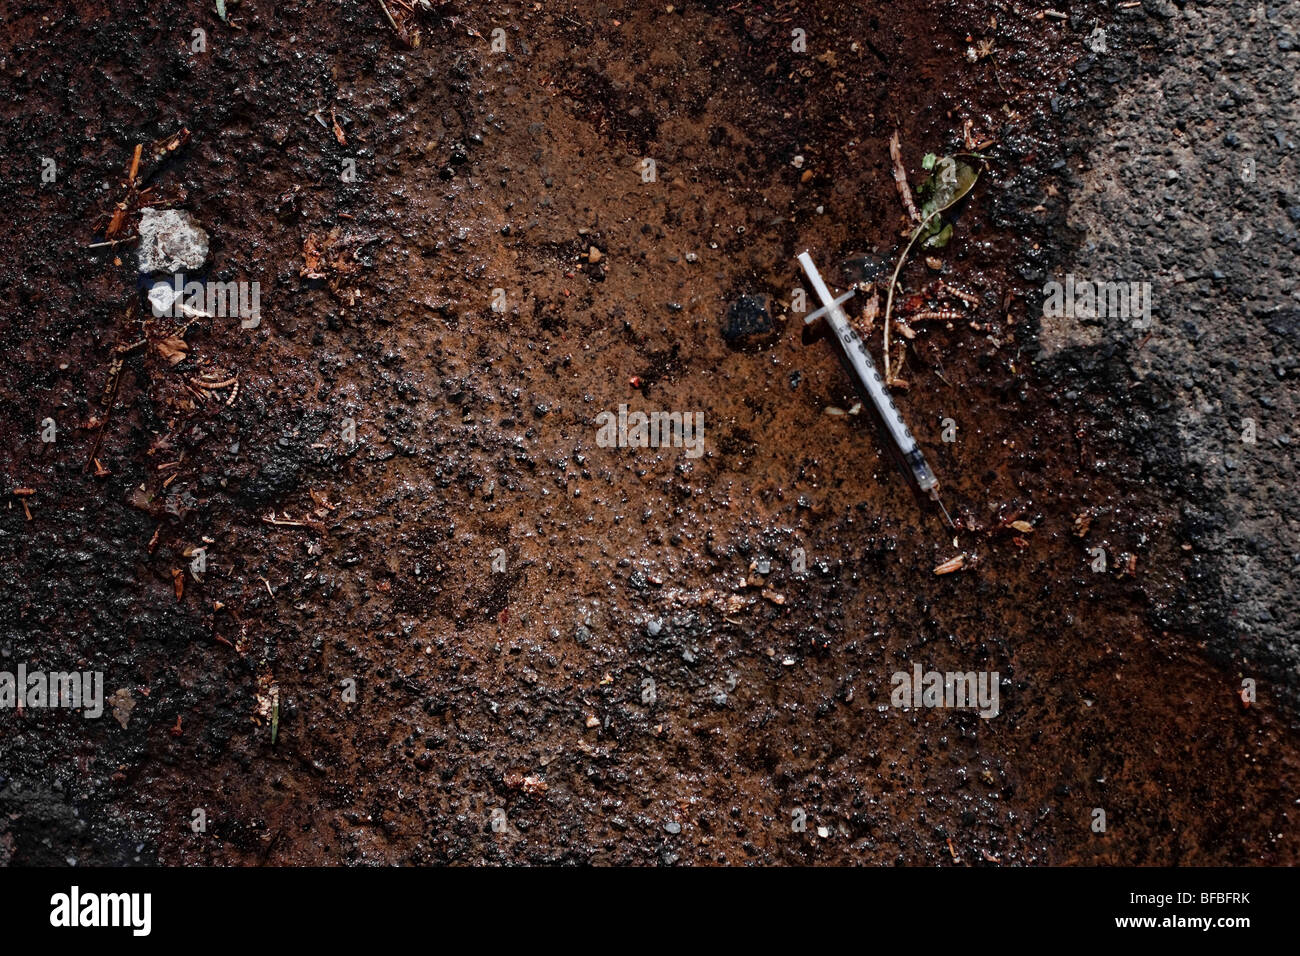 Discarded syringe on the side of the road next to a small public park in Surry Hills, Sydney, Australia Stock Photo